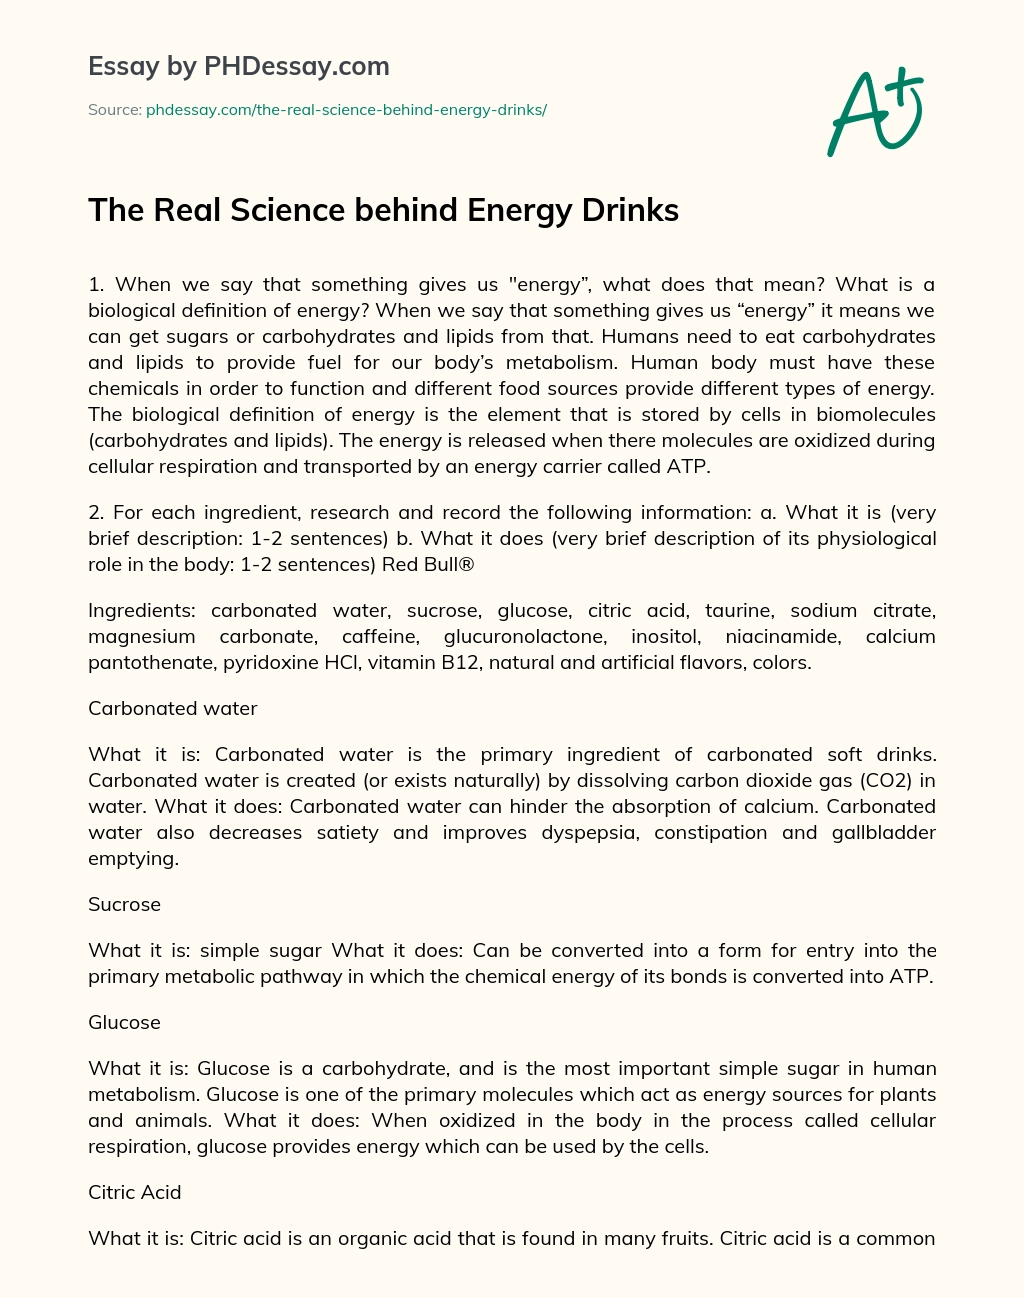 The Real Science behind Energy Drinks essay